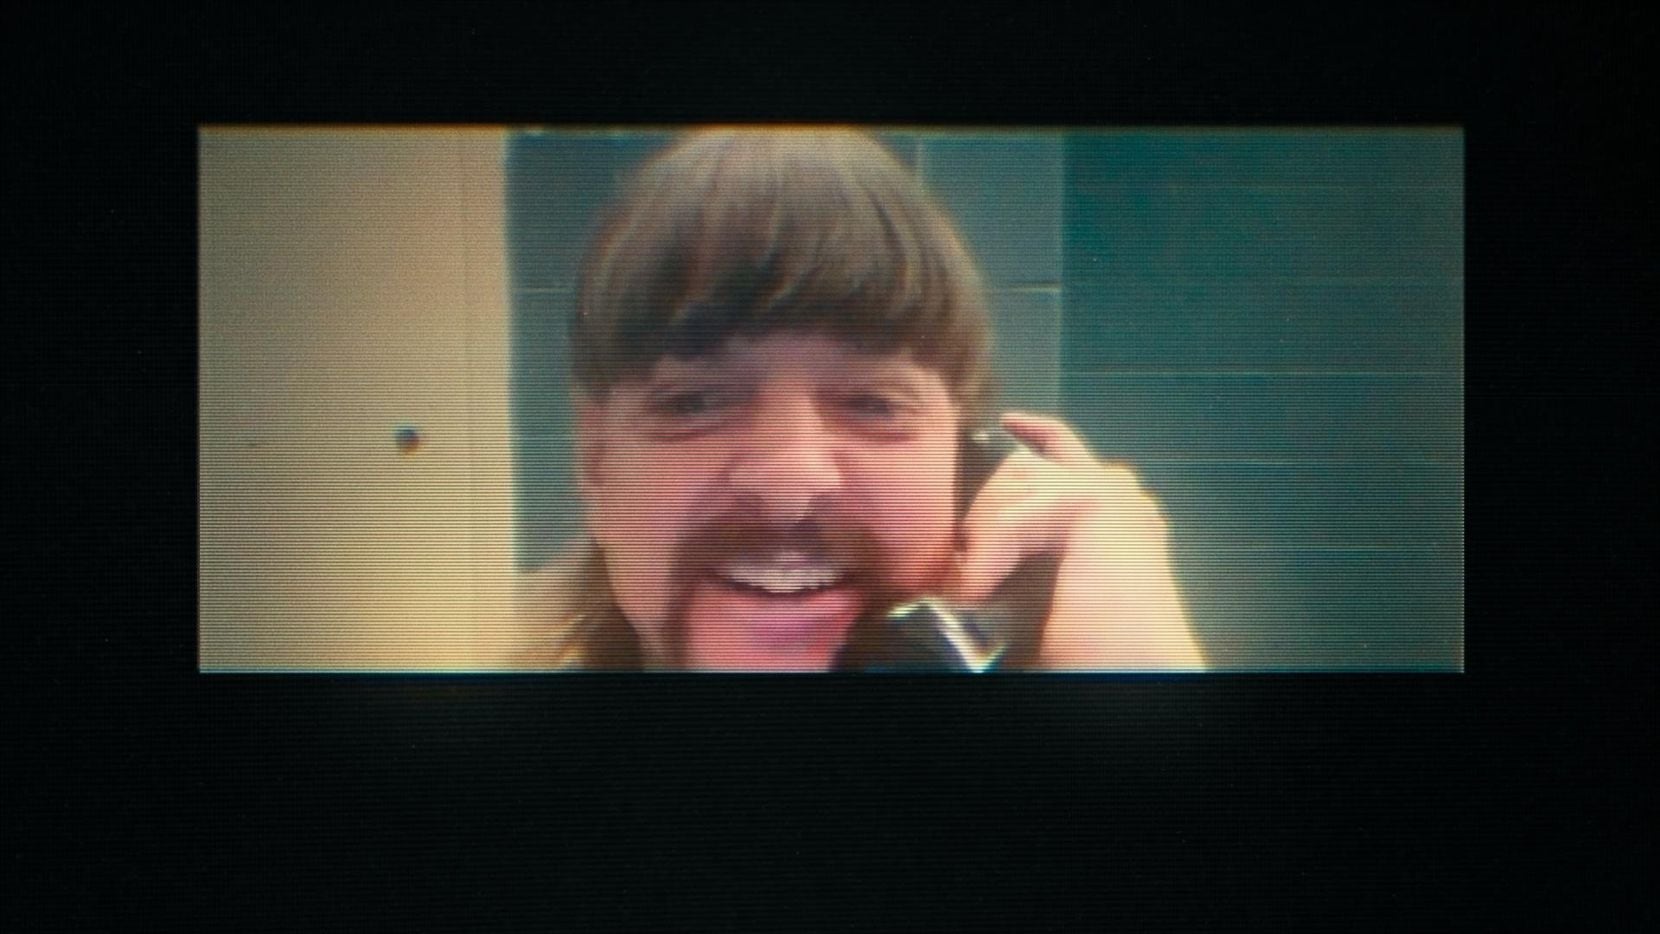 Joe Exotic takes a call from prison in a scene from "Tiger King 2." Part two of the docuseries is due out Nov. 17.